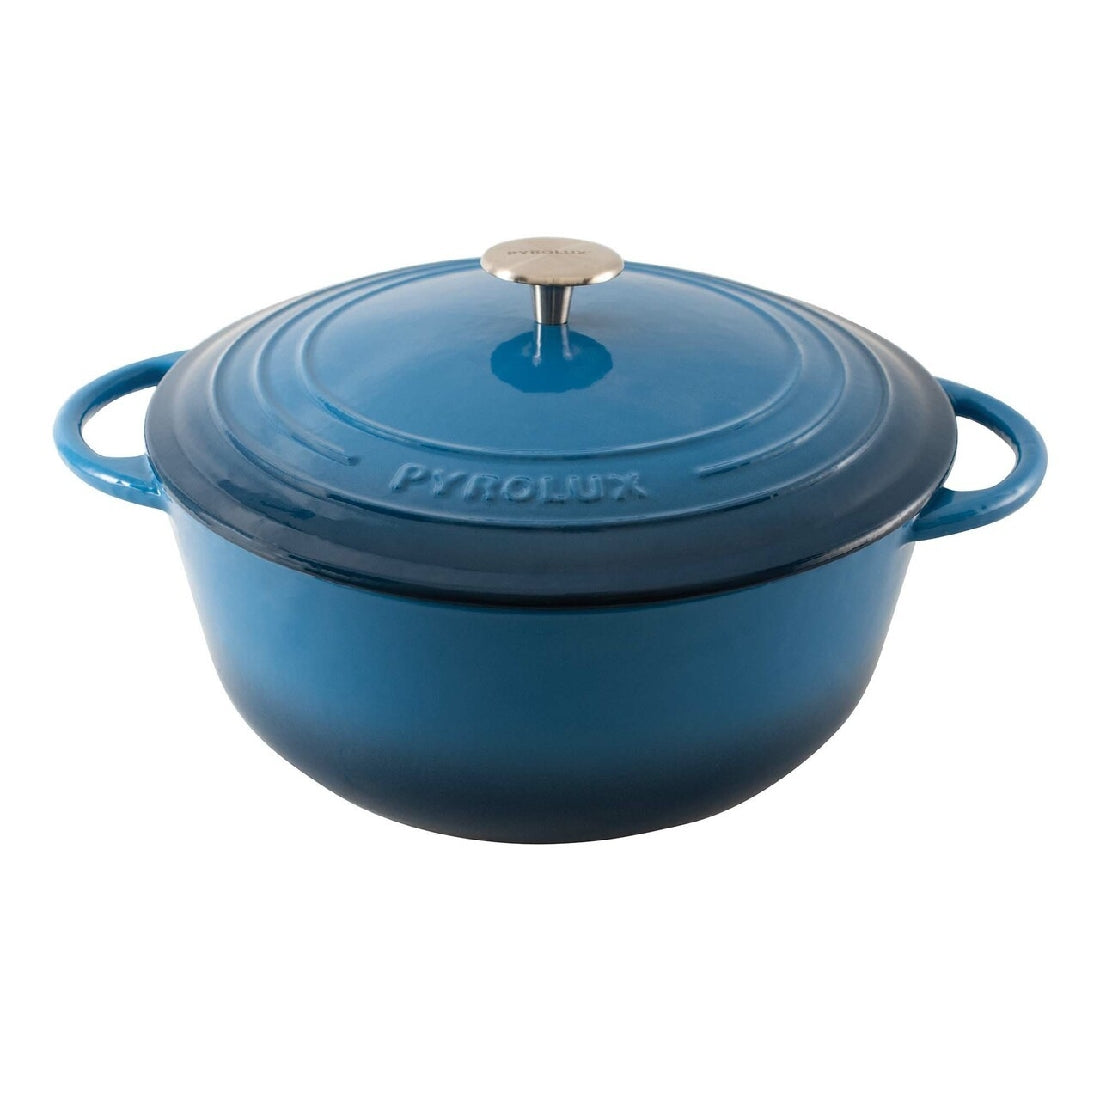 Pyrochef Round French Oven 28cm/6l Blue